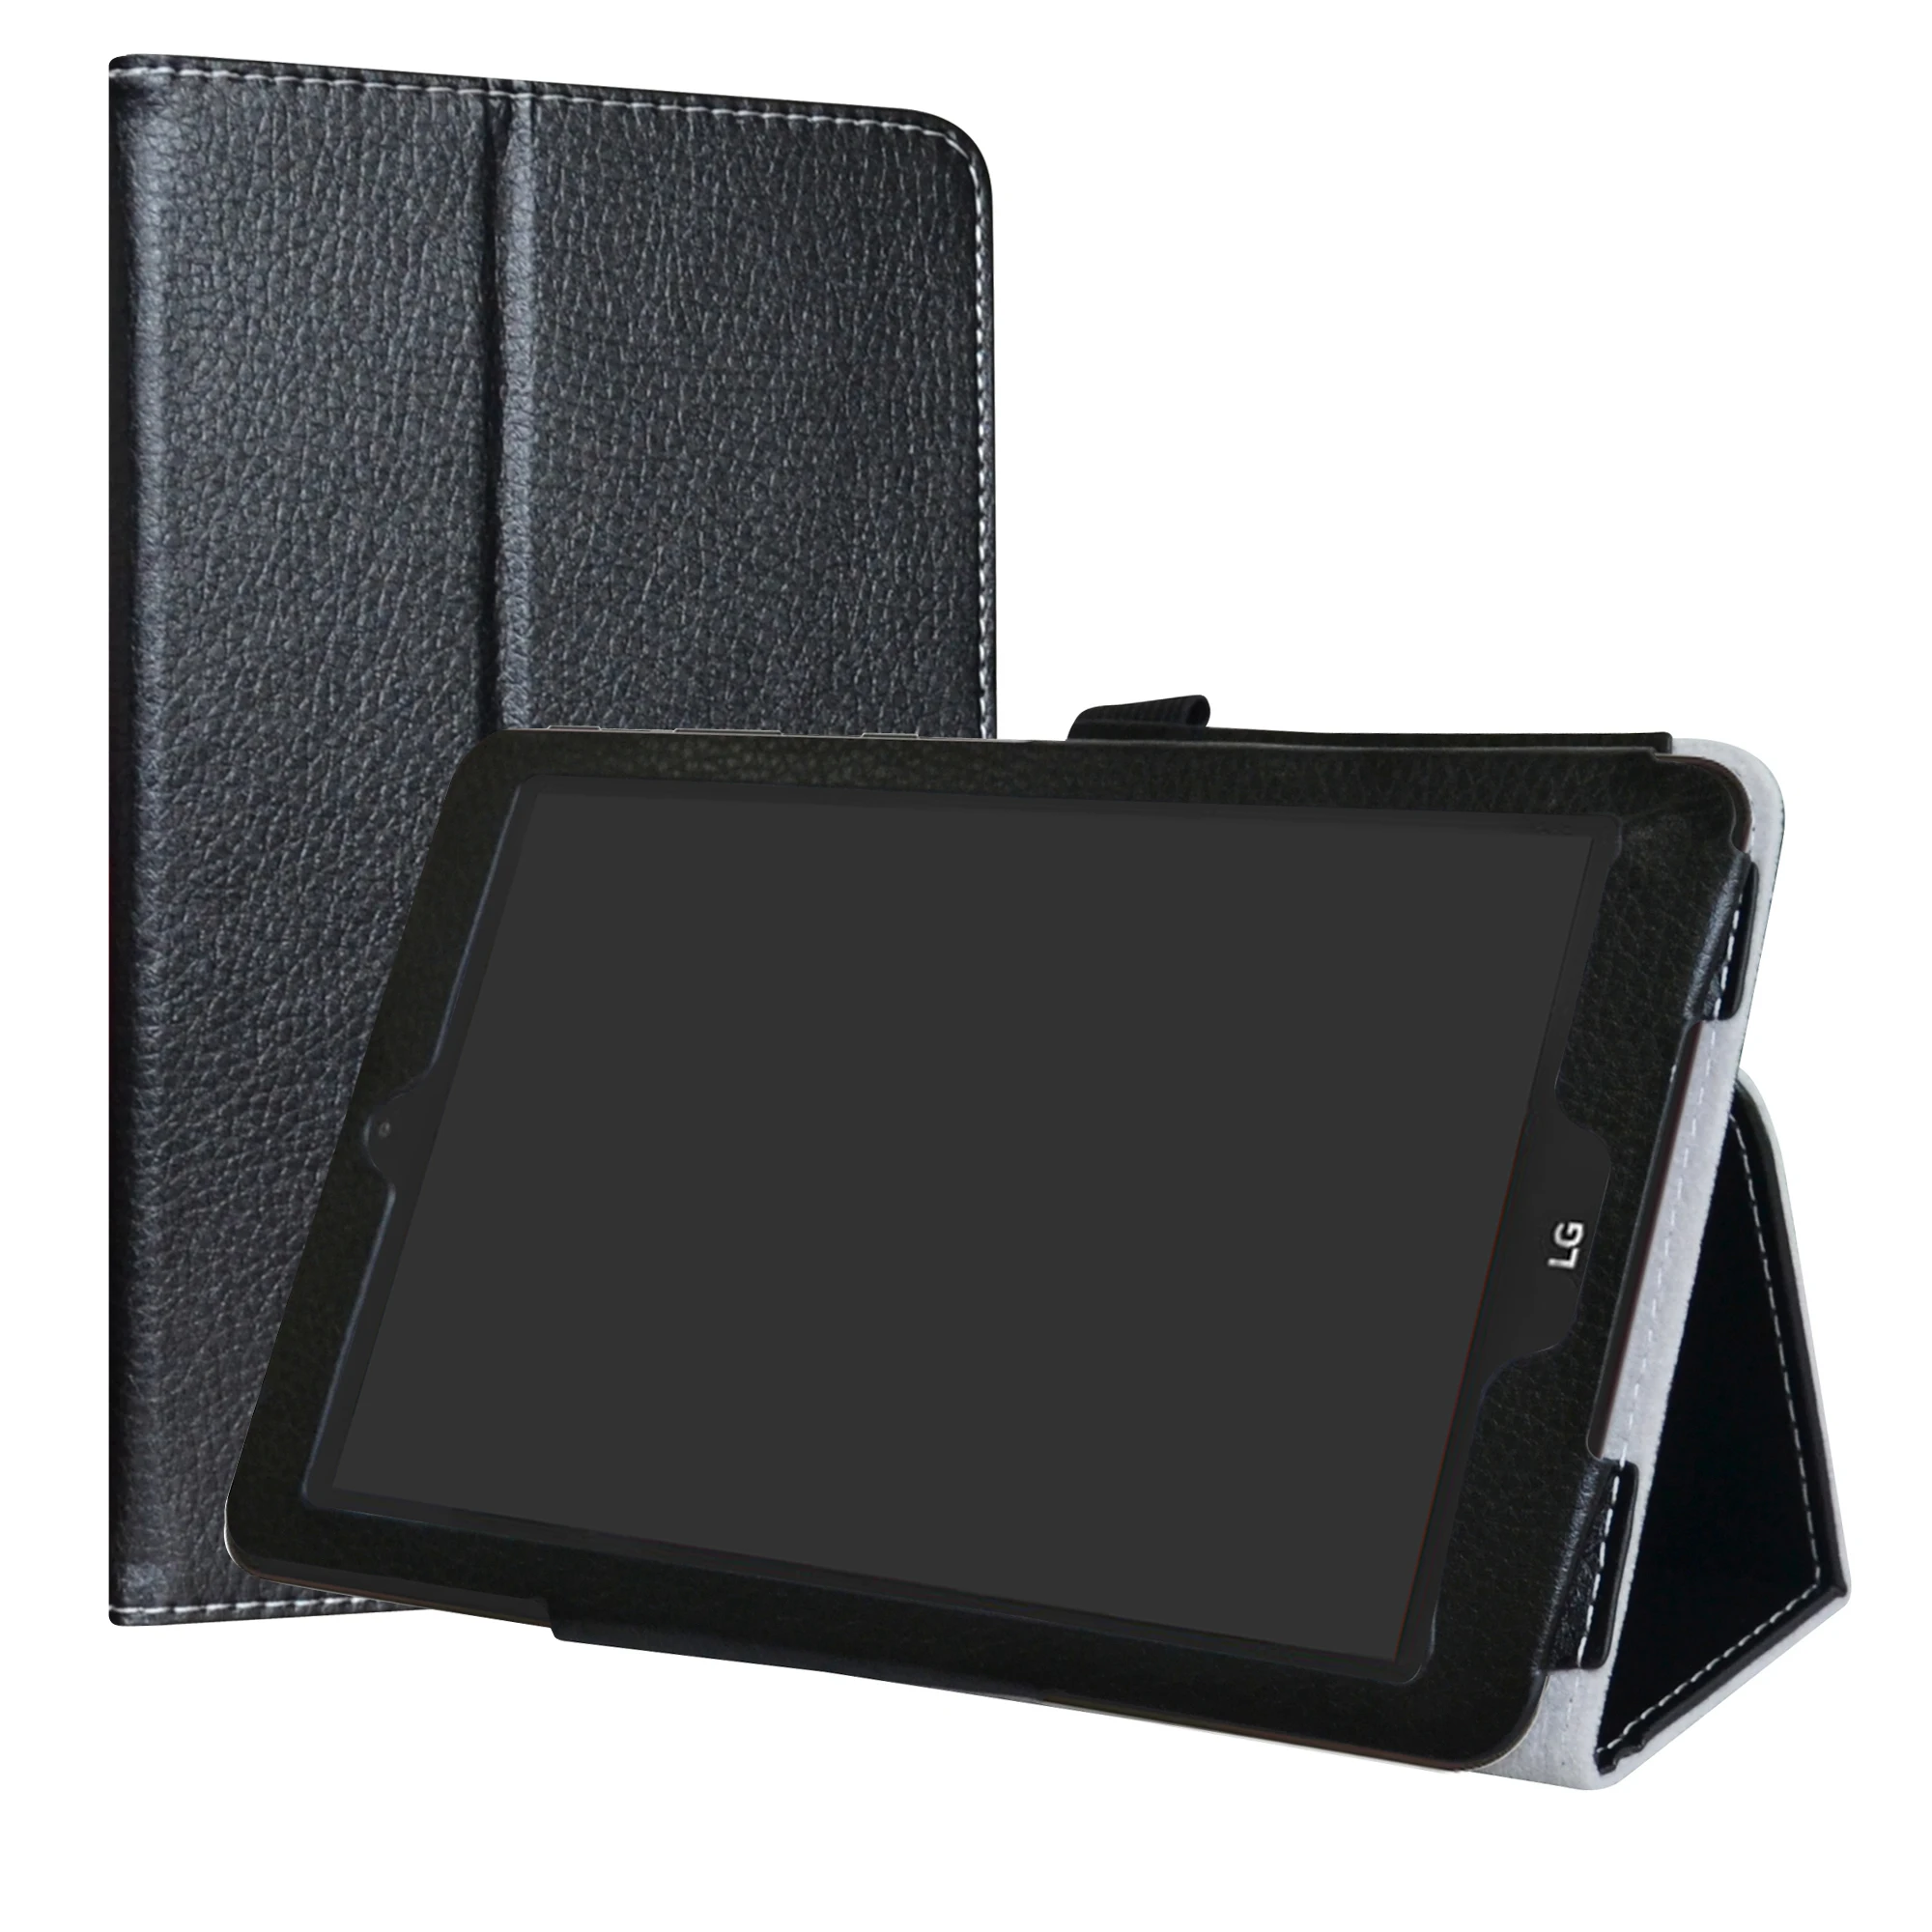 Case For  8" LG G Pad X II 8.0 Plus V530 Tablet Folding Stand PU Leather Cover with Magnetic Closure